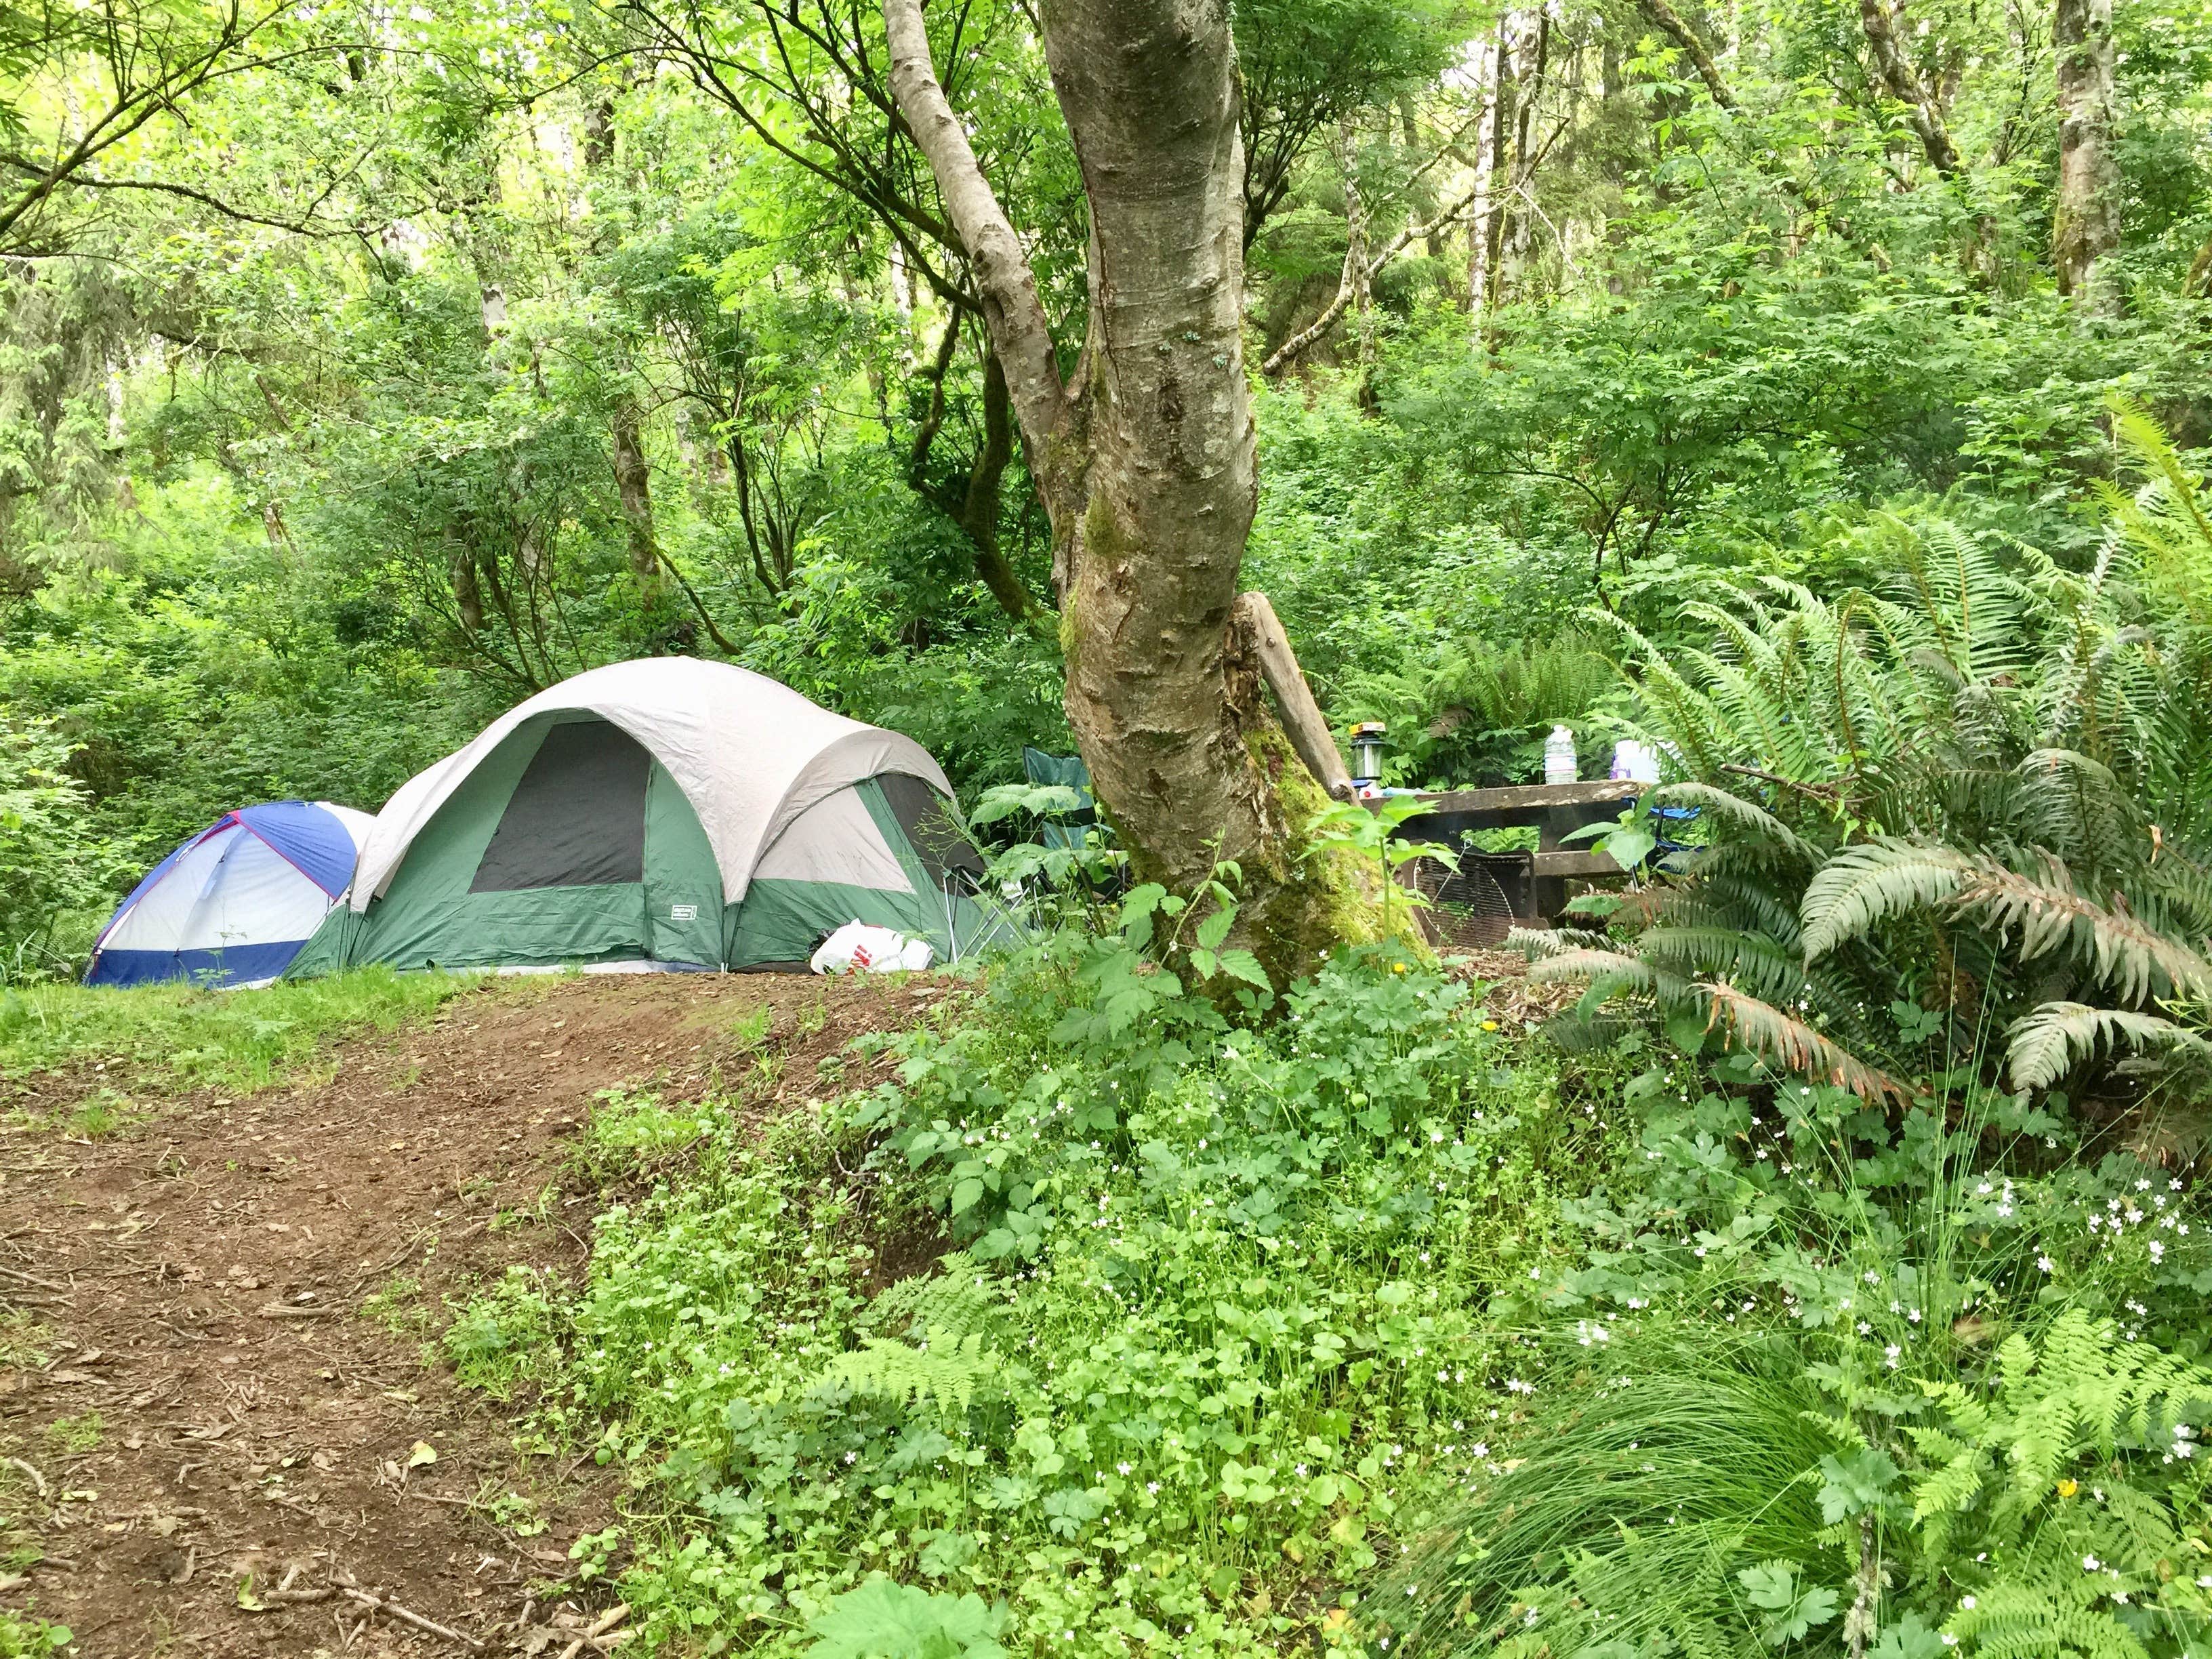 Camper submitted image from Flint Ridge Backcountry Site - Redwood National and State Park - 4